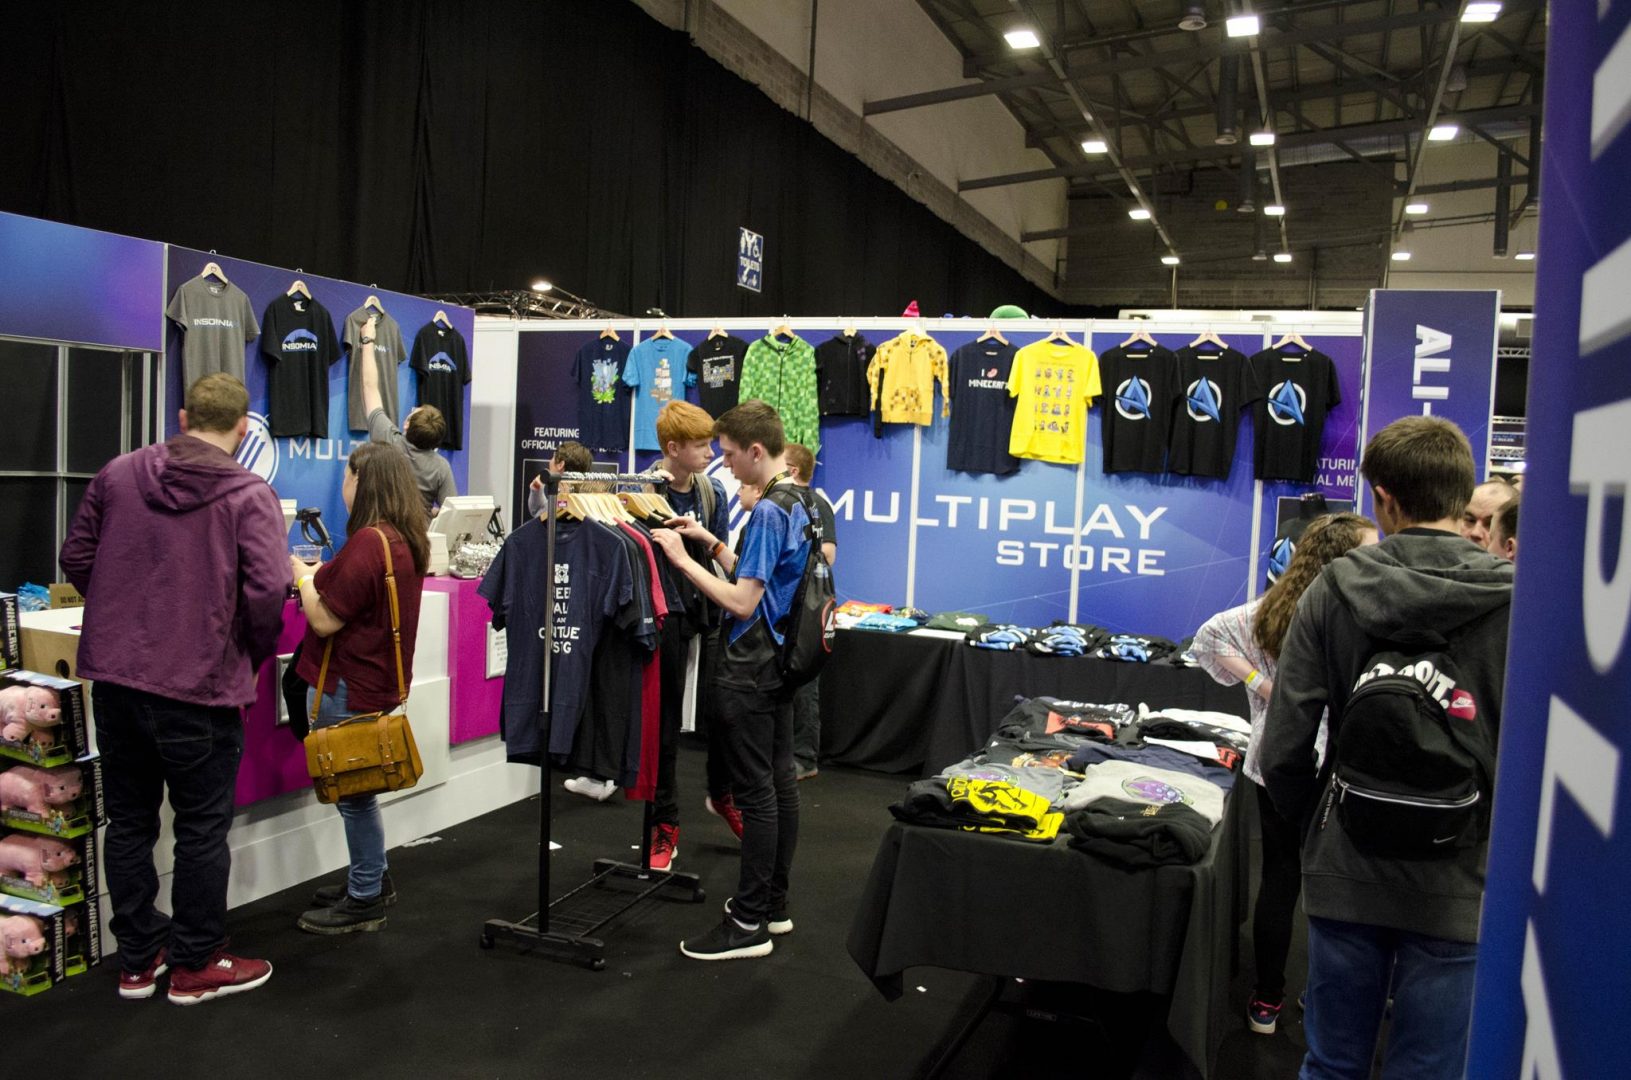 Multiplay Insomnia Gaming Festival I55 – Ricoh Arena, Coventry UK